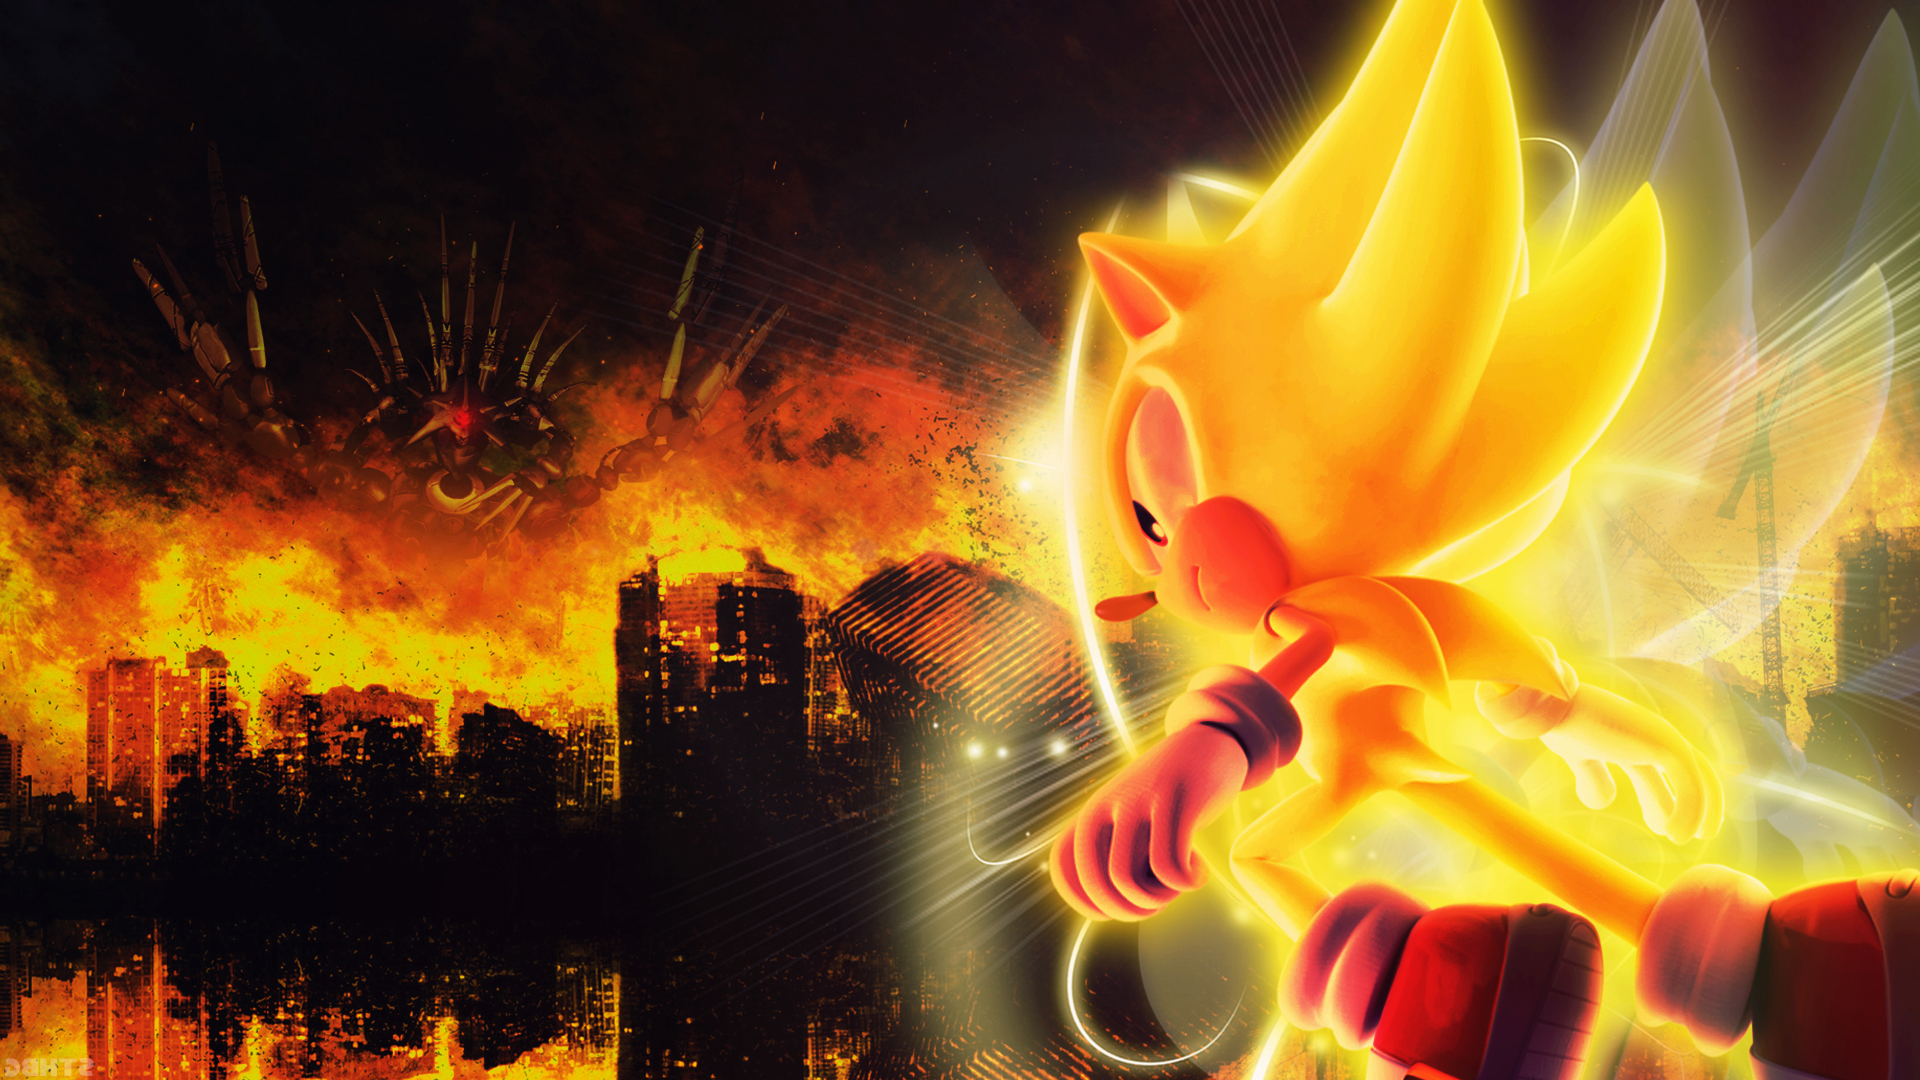 WallPapers on SonicUniverses-Group - DeviantArt